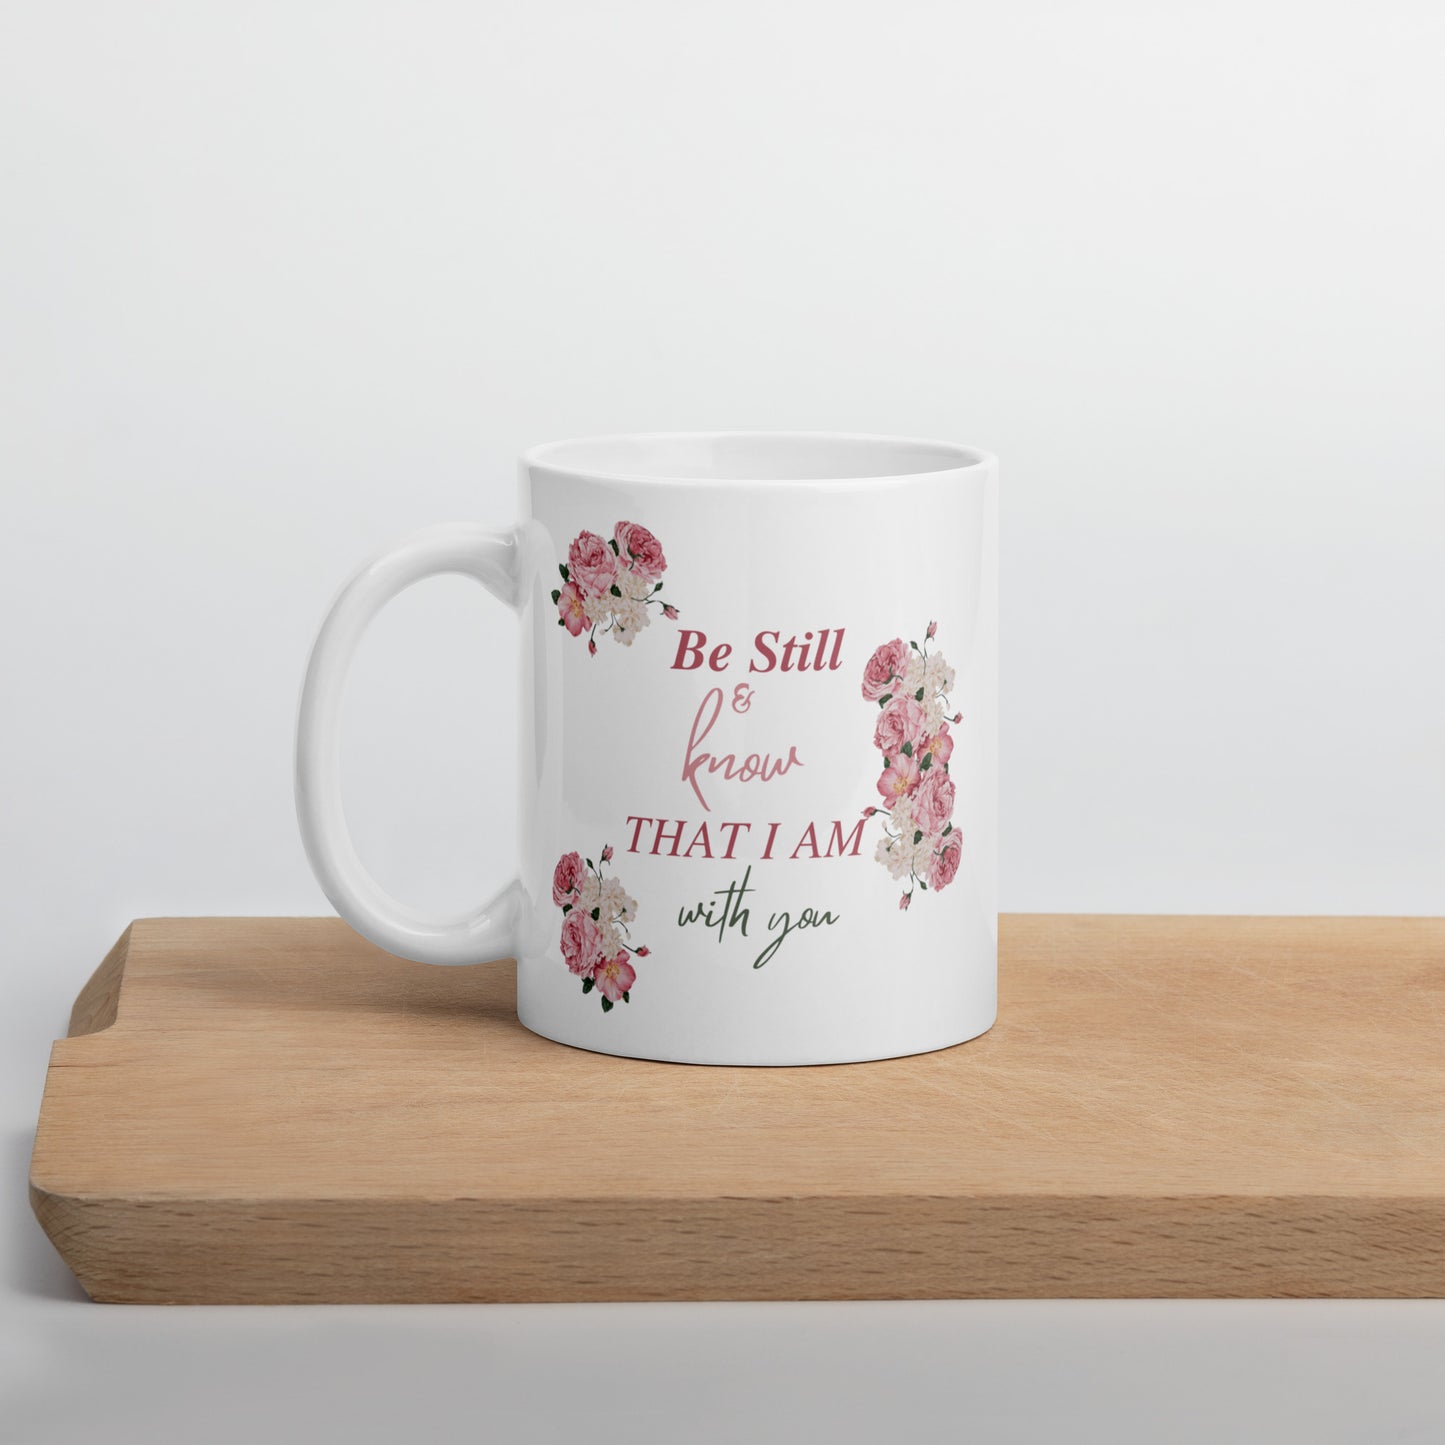 BE STILL AND KNOW THAT I AM WITH YOU - LILAC - White glossy mug